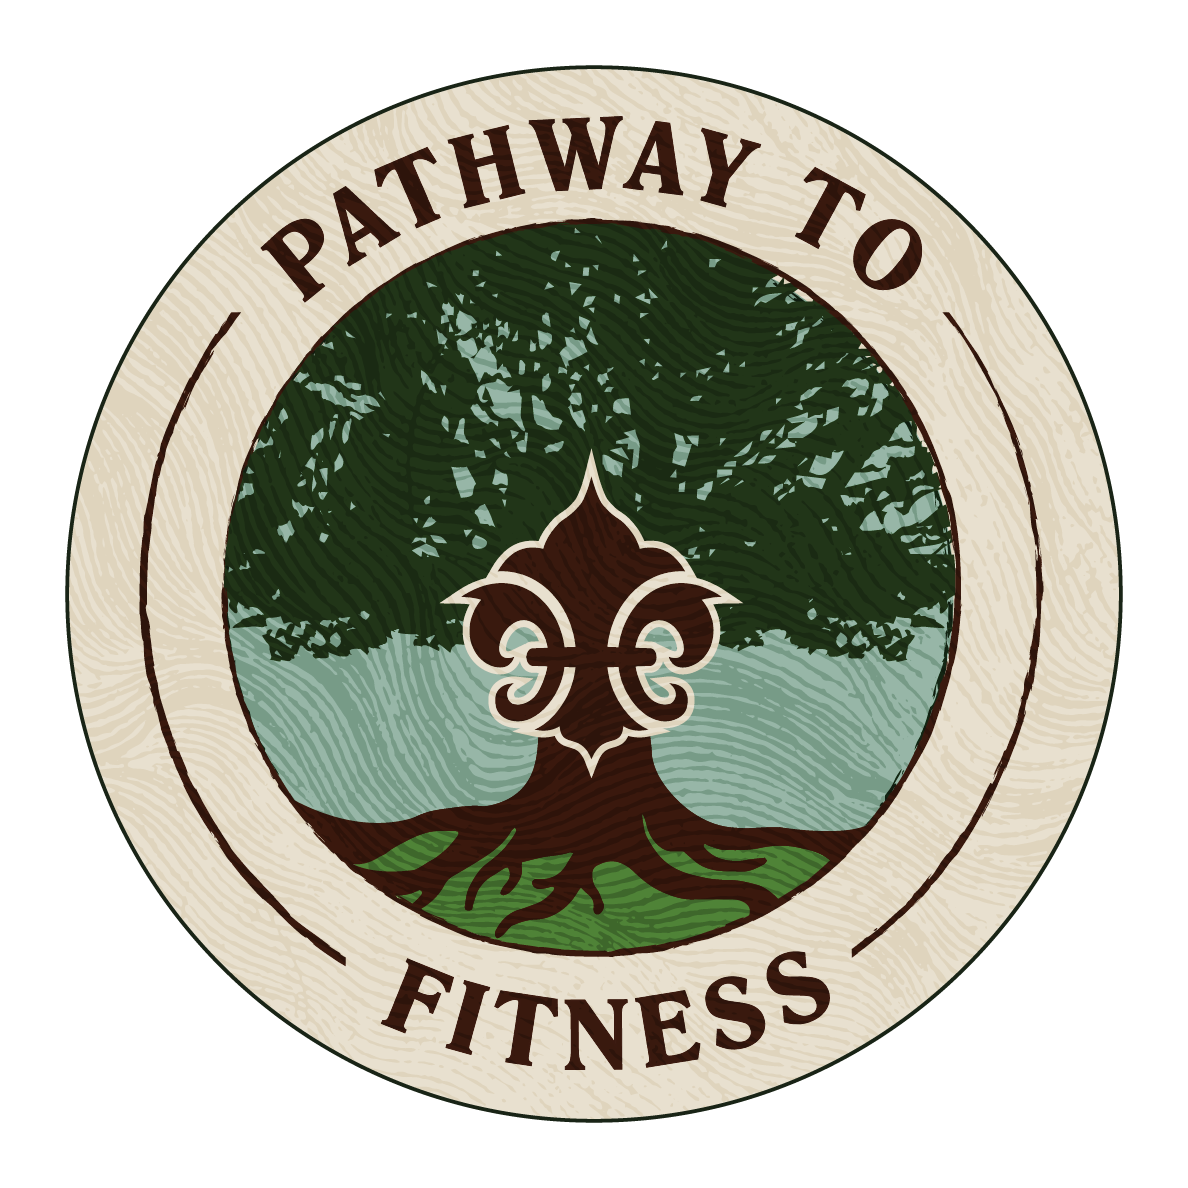 Pathway to Fitness